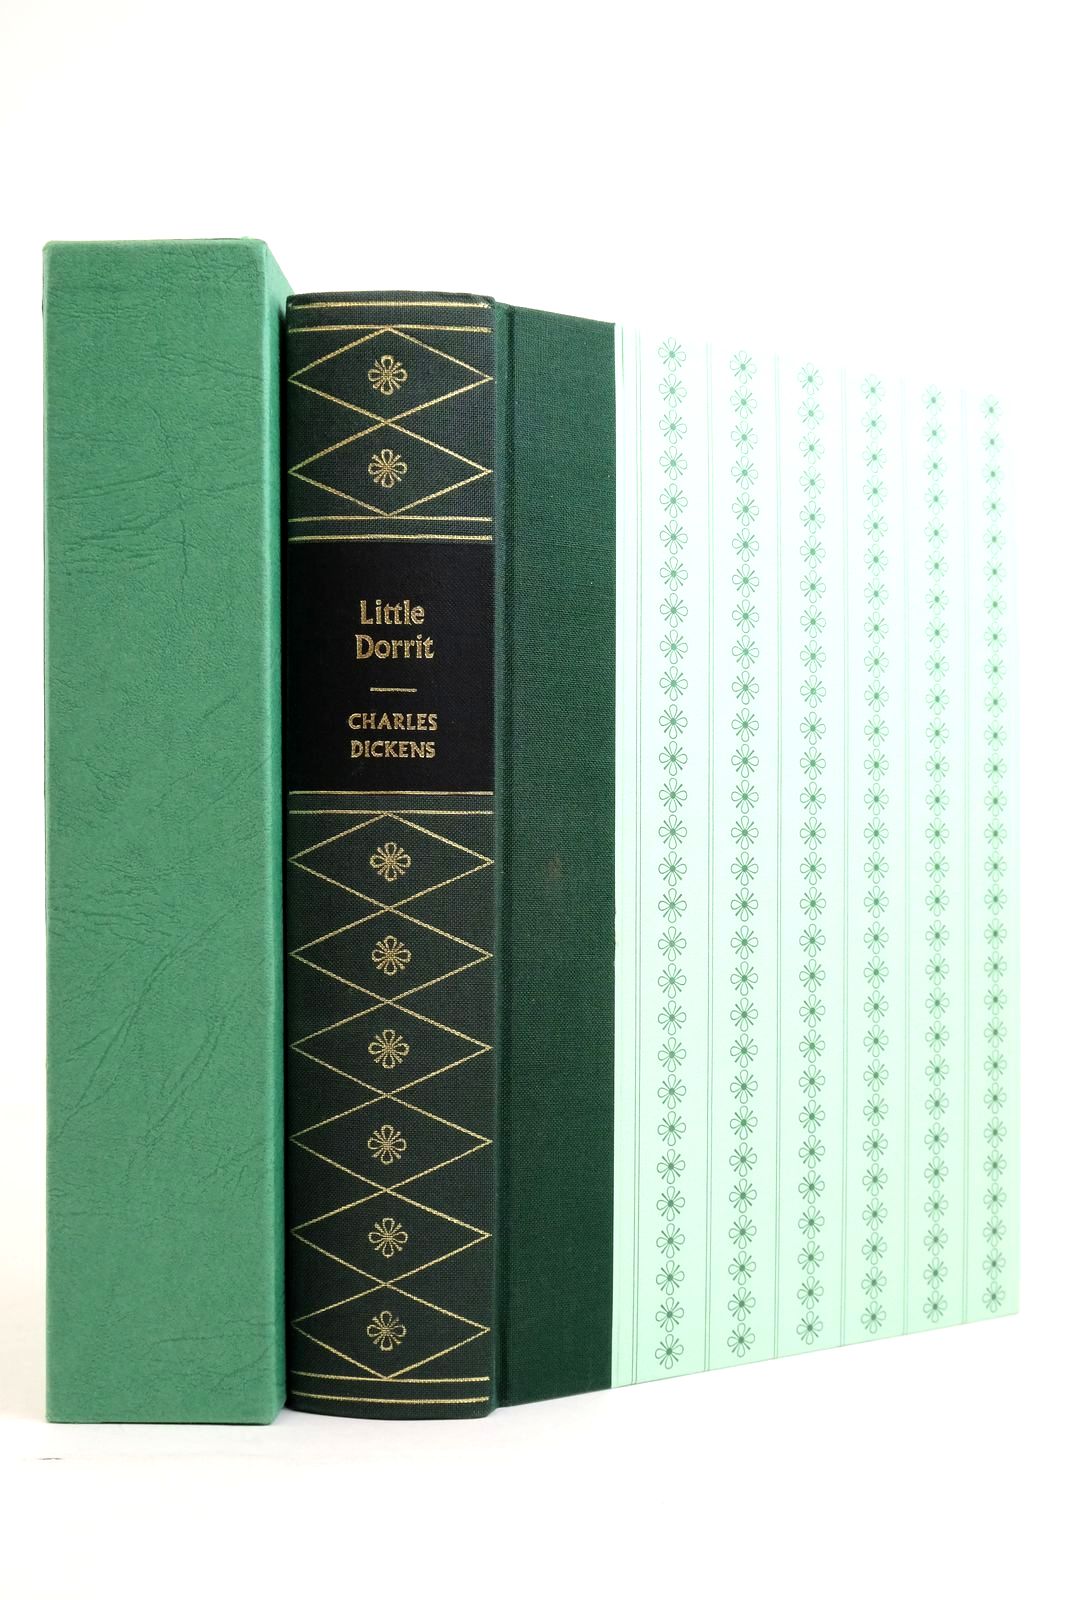 Photo of LITTLE DORRIT written by Dickens, Charles
Hibbert, Christopher illustrated by Keeping, Charles published by Folio Society (STOCK CODE: 2135946)  for sale by Stella & Rose's Books